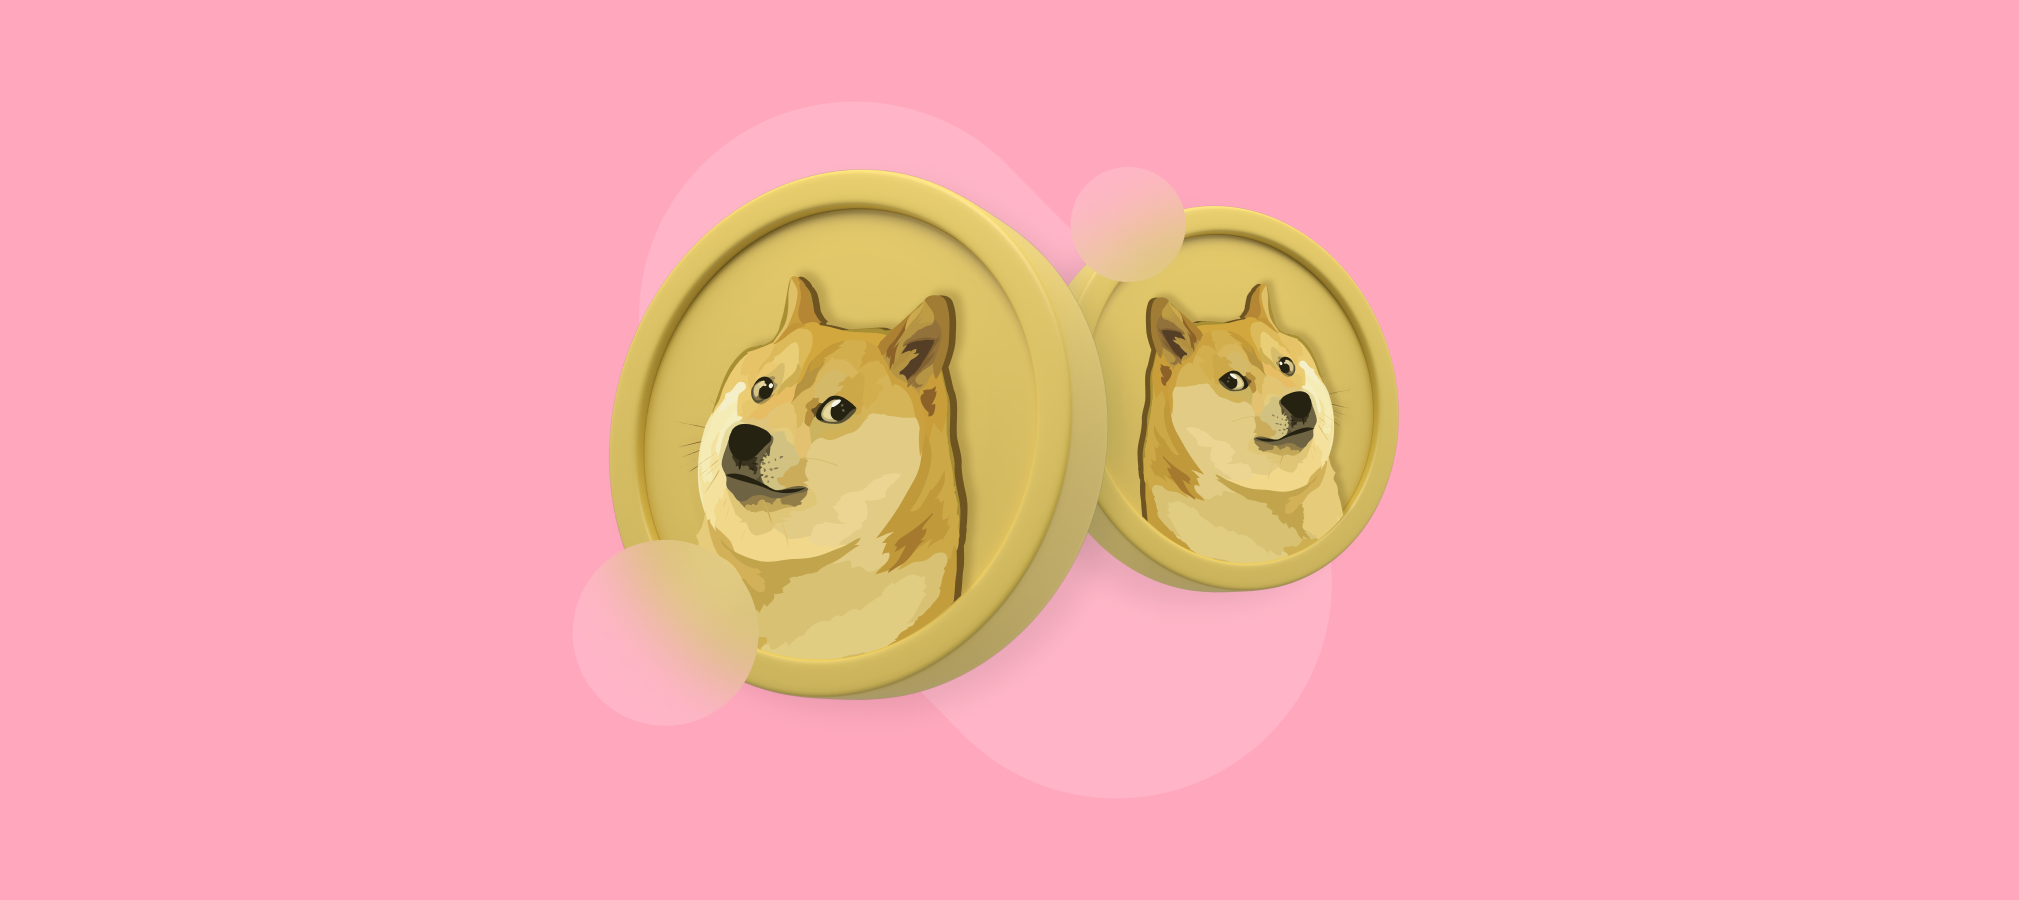 What Is Dogecoin?